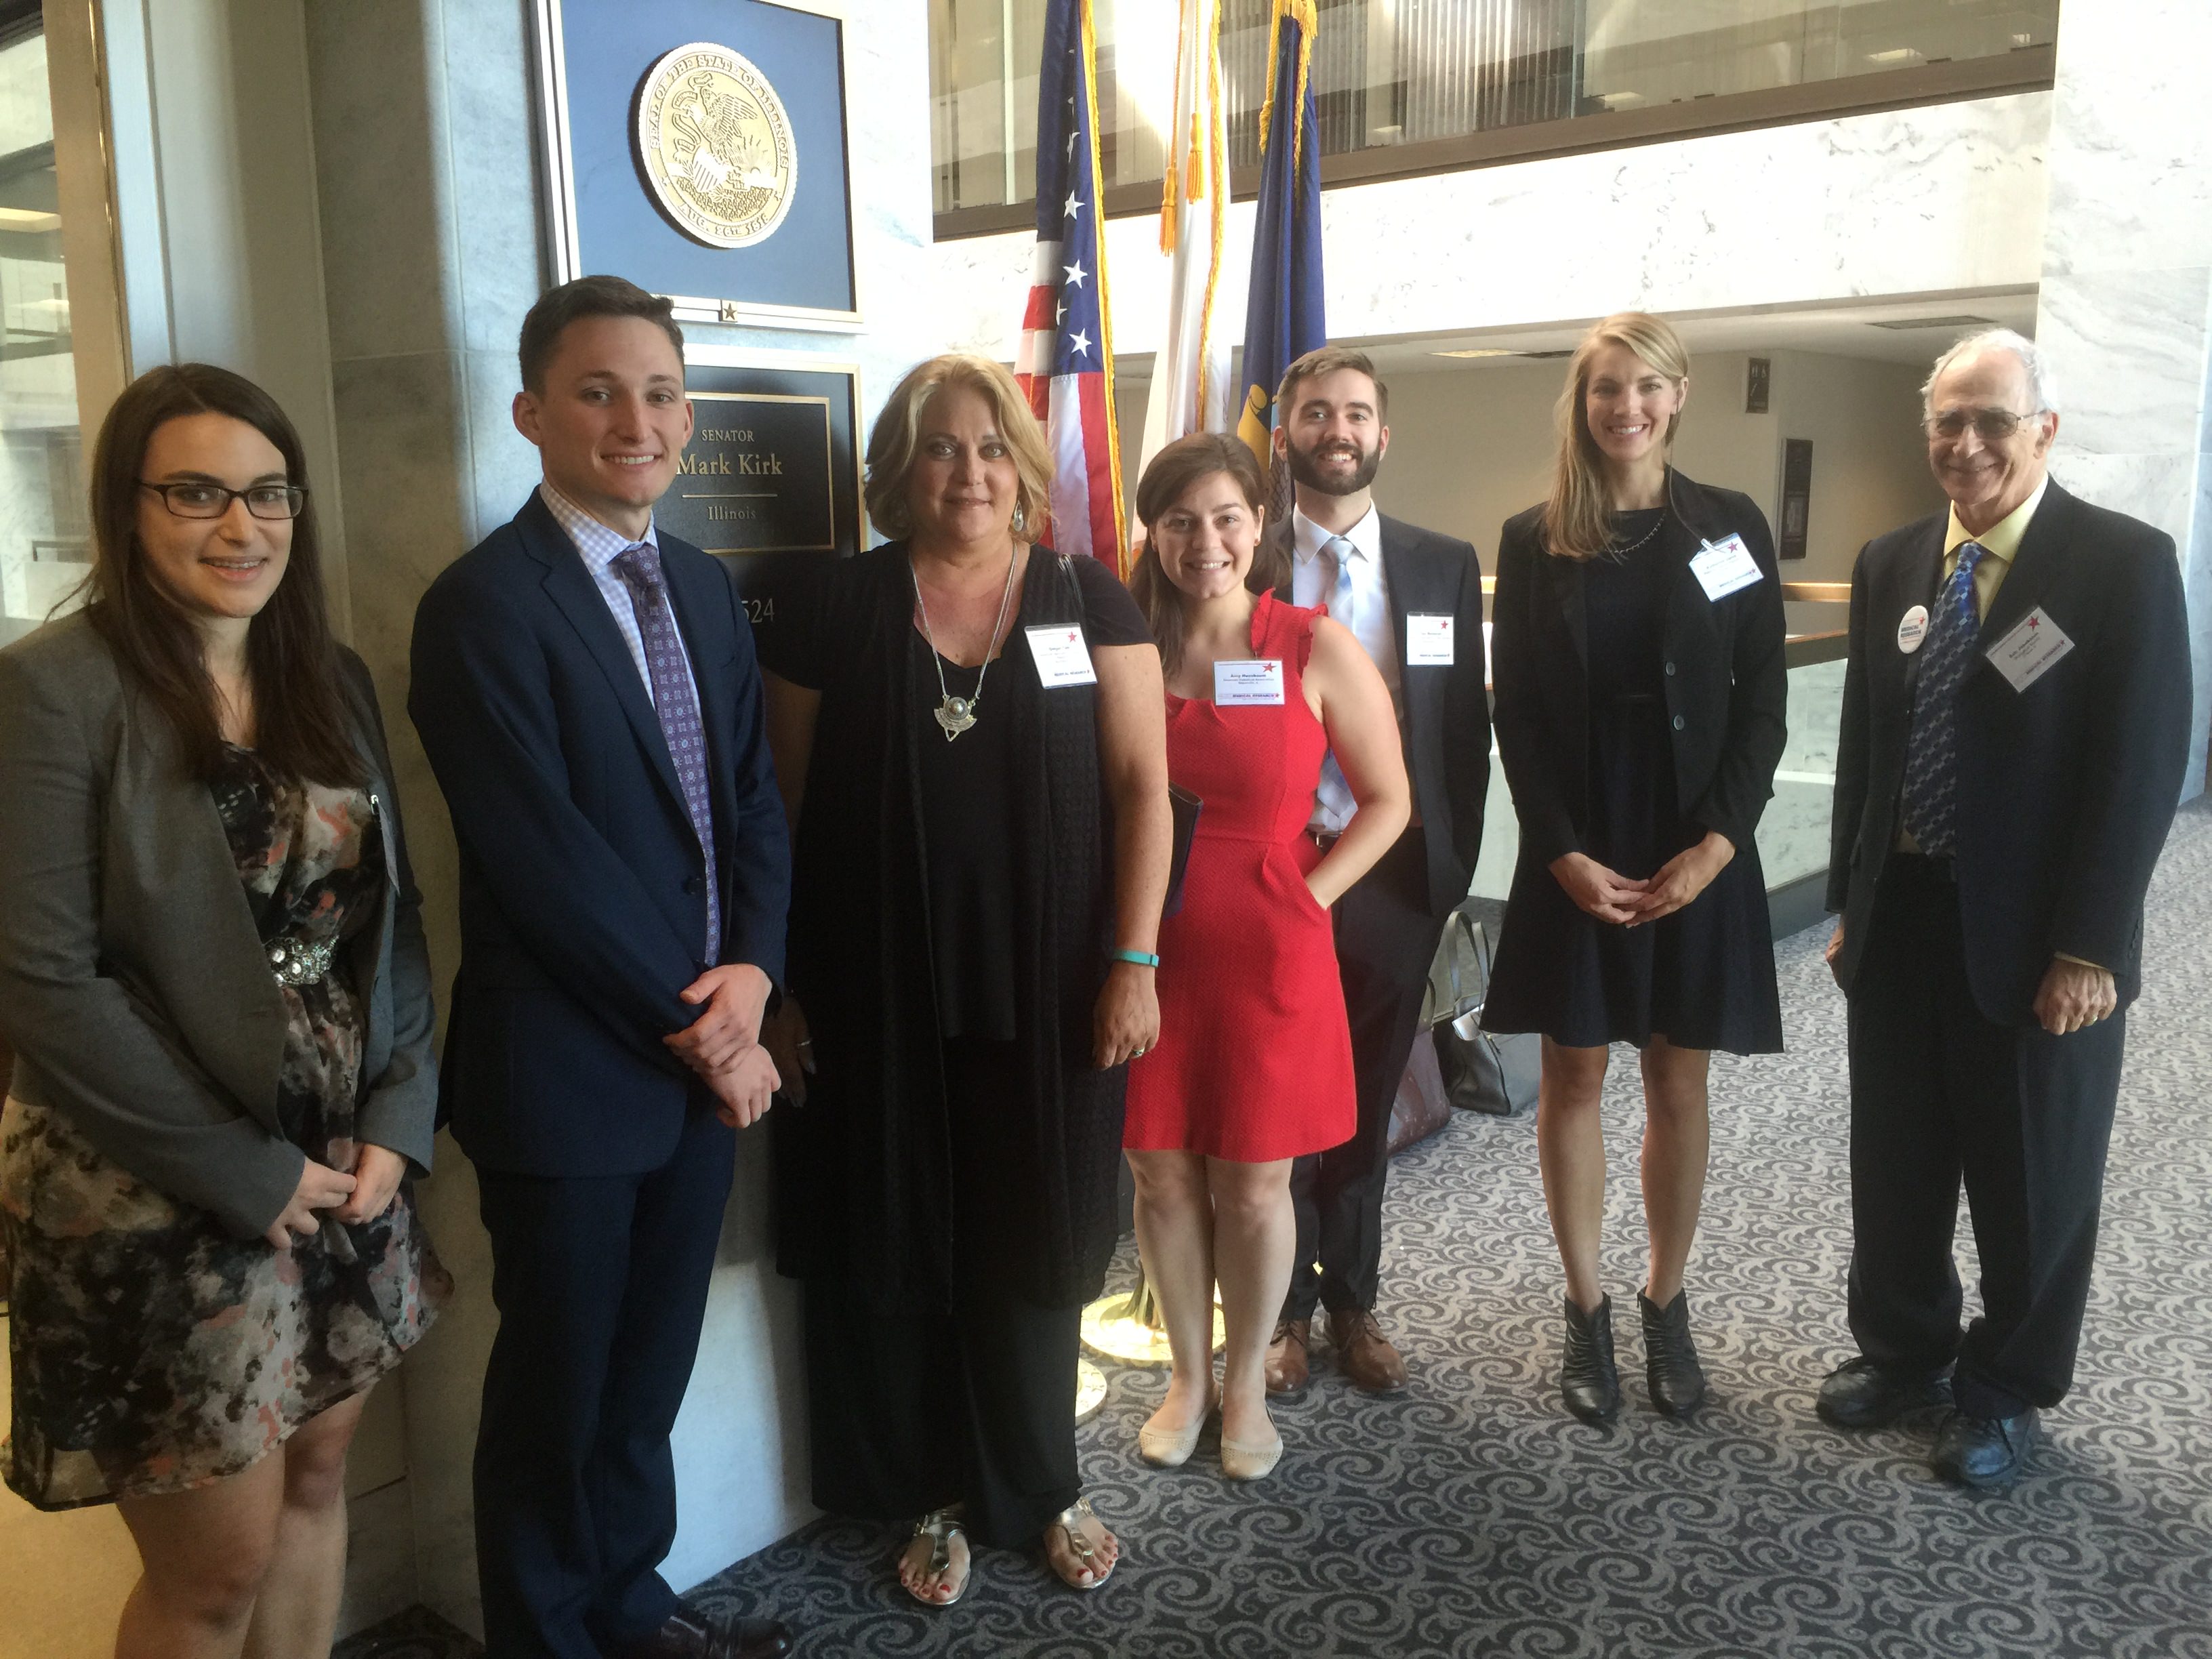 Eric Jakobsson (far right) visits the office of Senator Mark Kirk to advocate for NIH funding as part of the Rally for Medical Research.